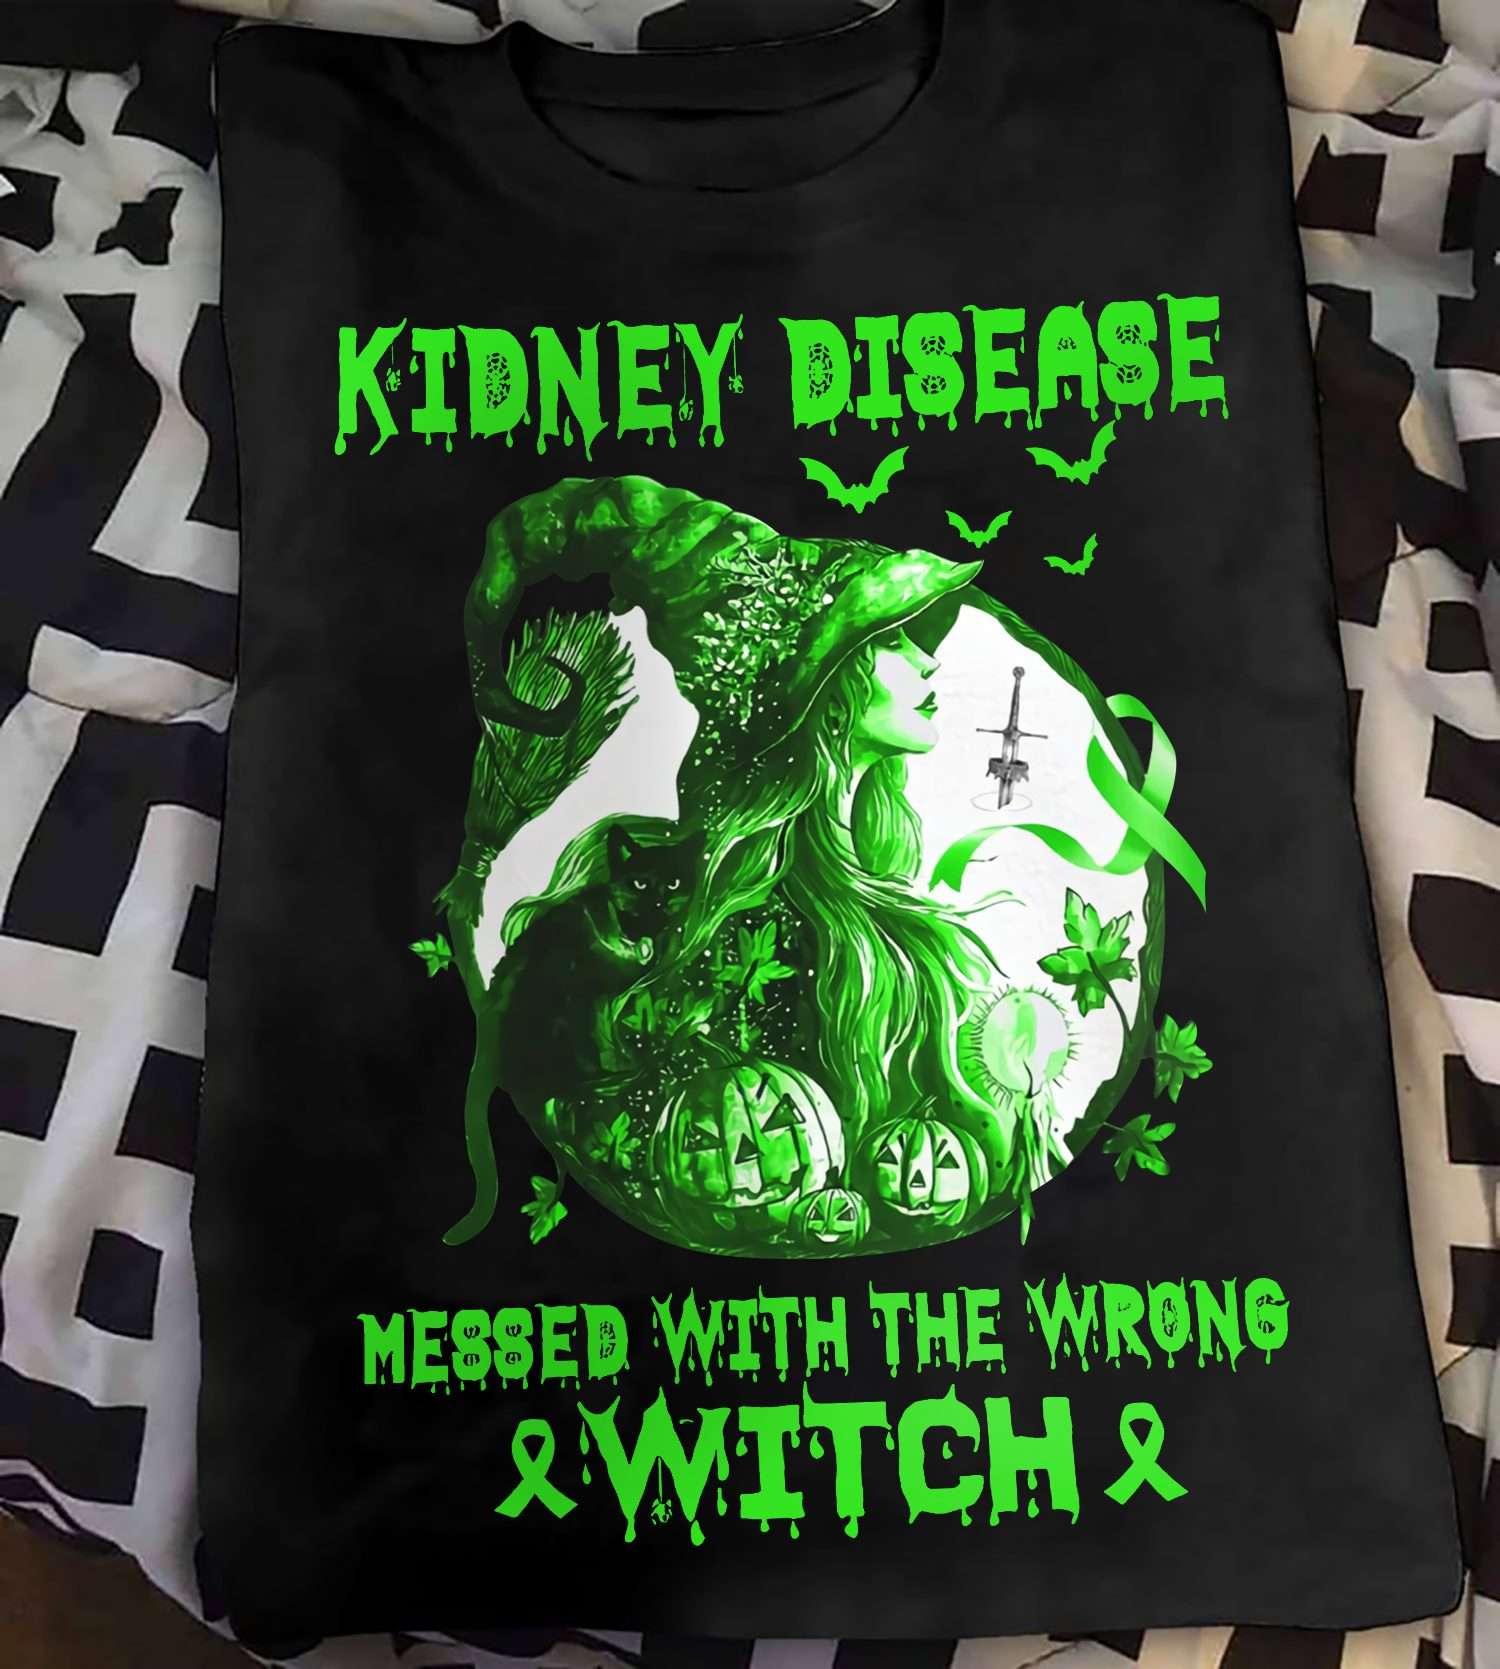 Kidney Disease Awareness - Messed with the wrong witch, Halloween witch costume, St.Patrick day